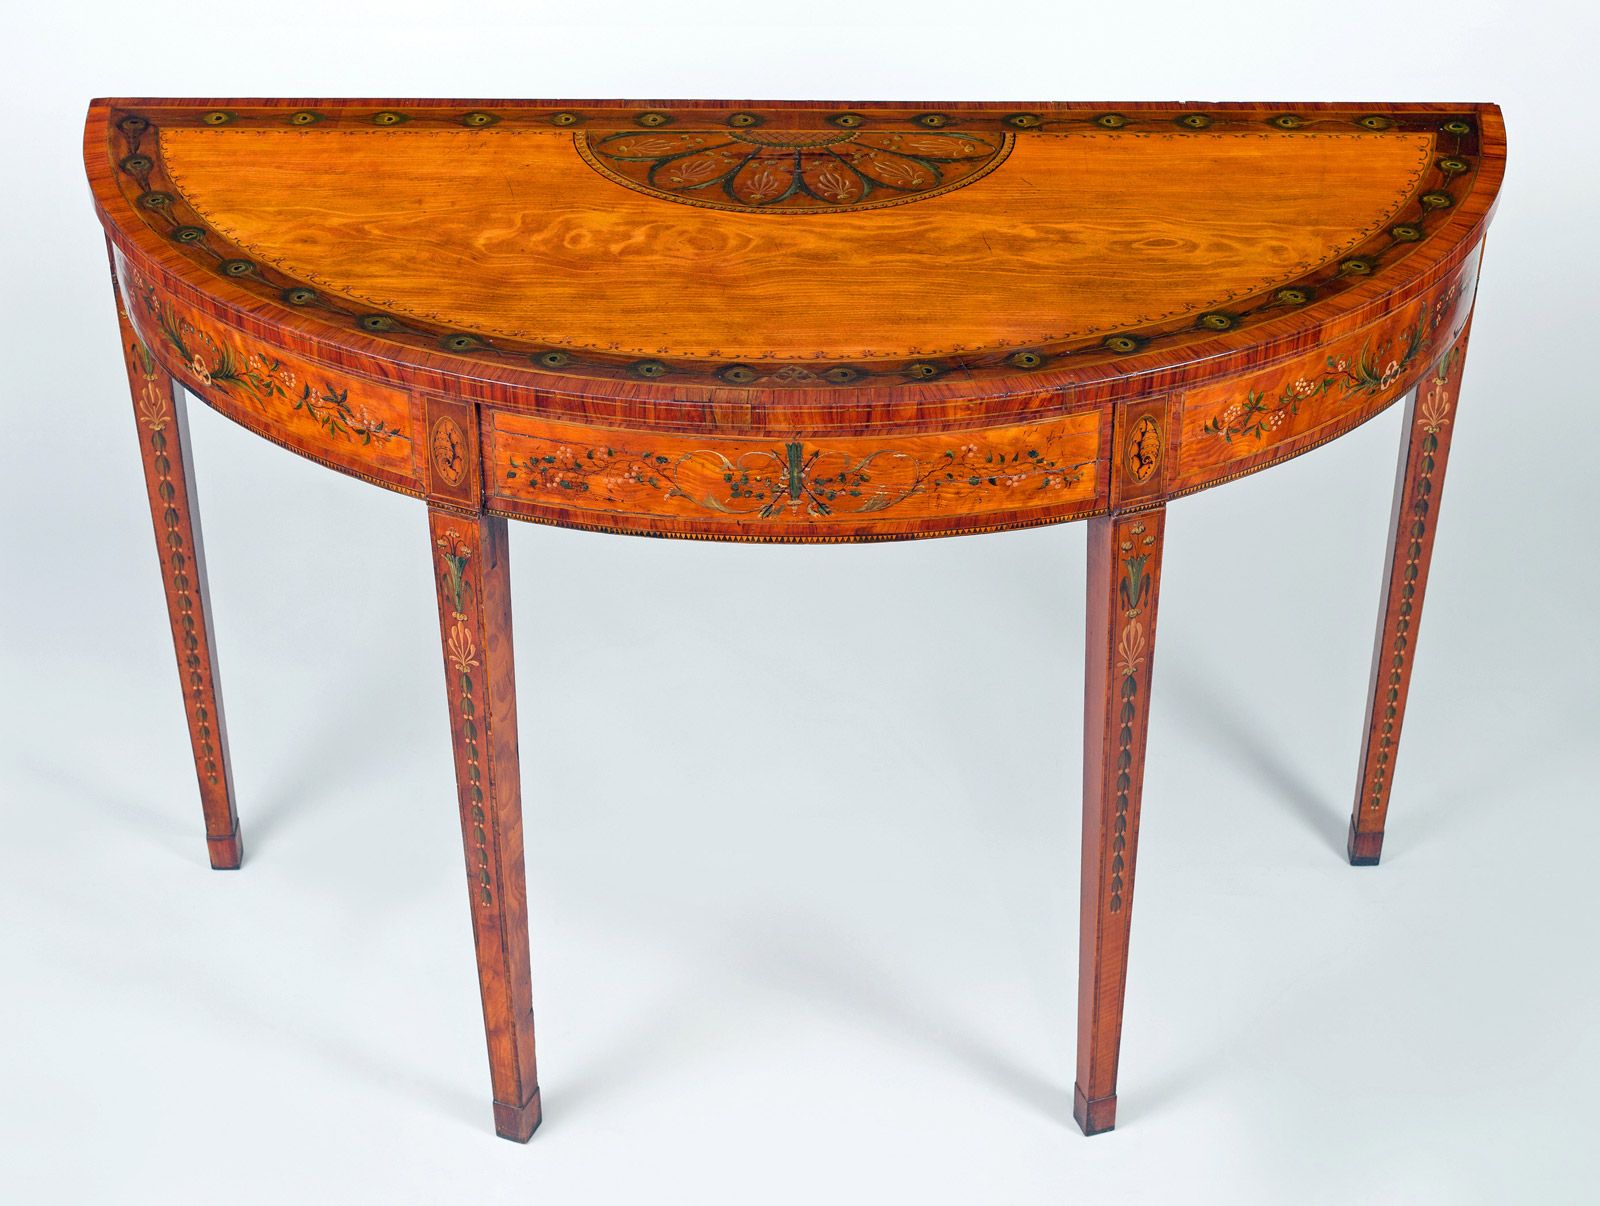 George Iii Inlaid Satinwood D Shaped Console Table Throughout Orange Inlay Console Tables (View 2 of 30)